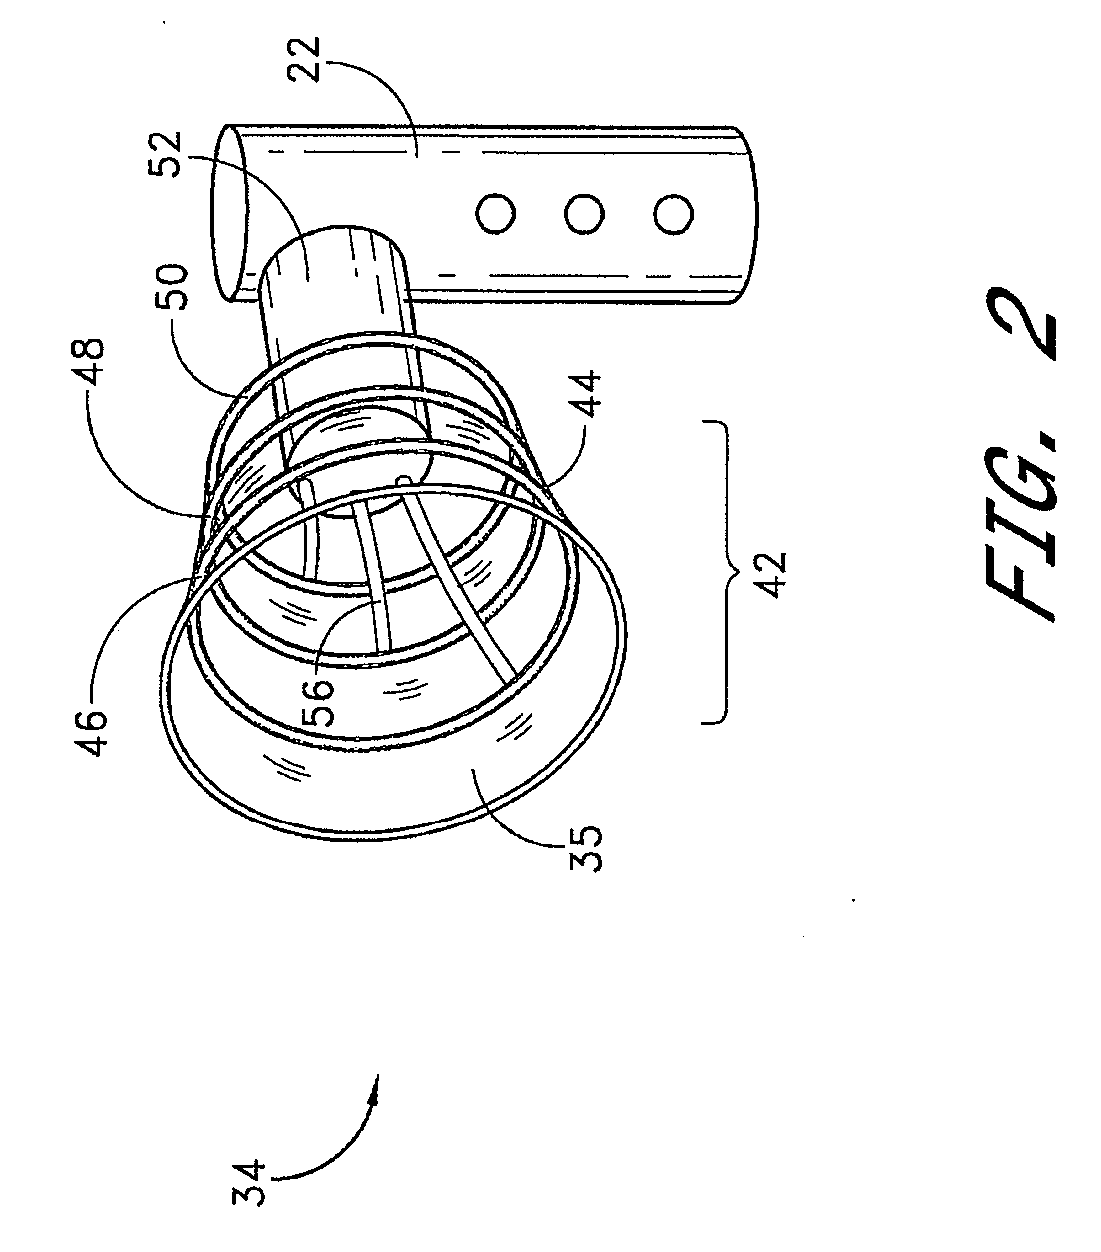 Disposable patient interface for intraductal fluid aspiration system